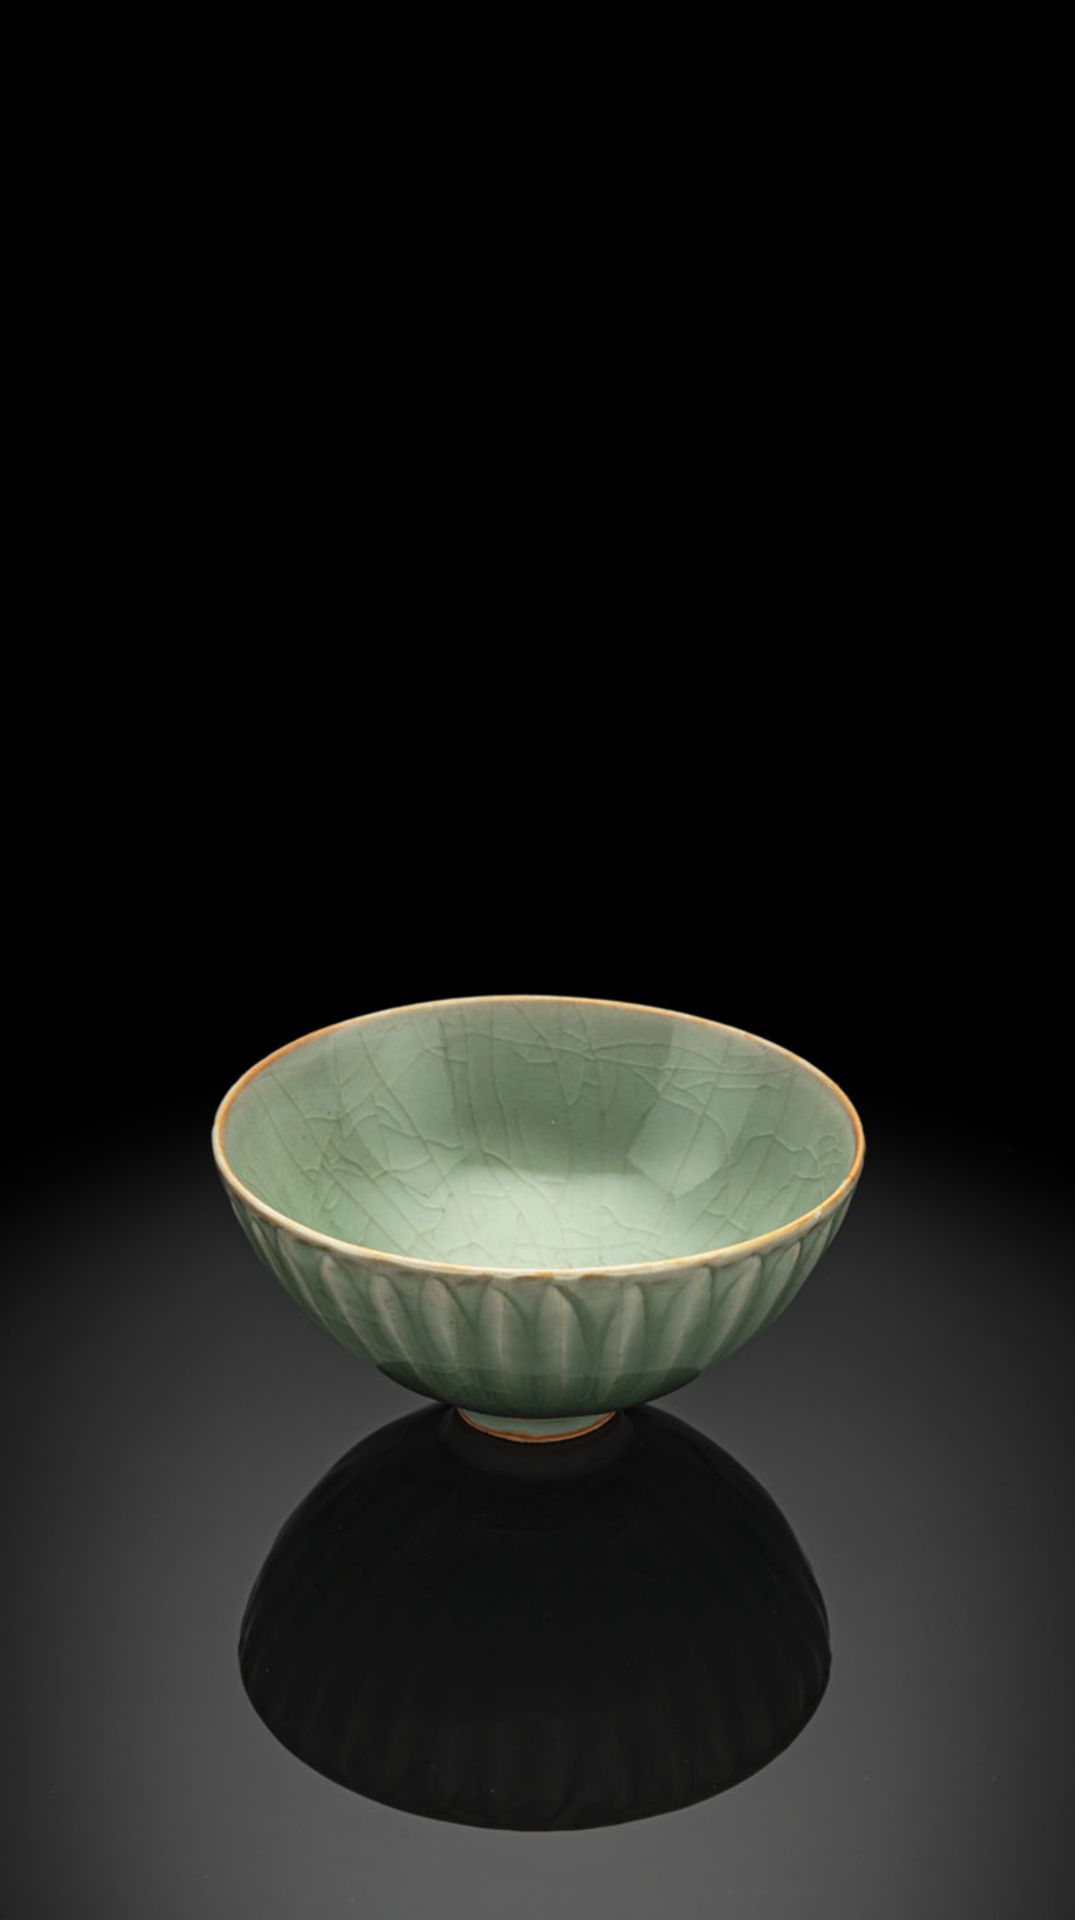 A FINE LONGQUAN BOWL FROM THE CLARK COLLECTION